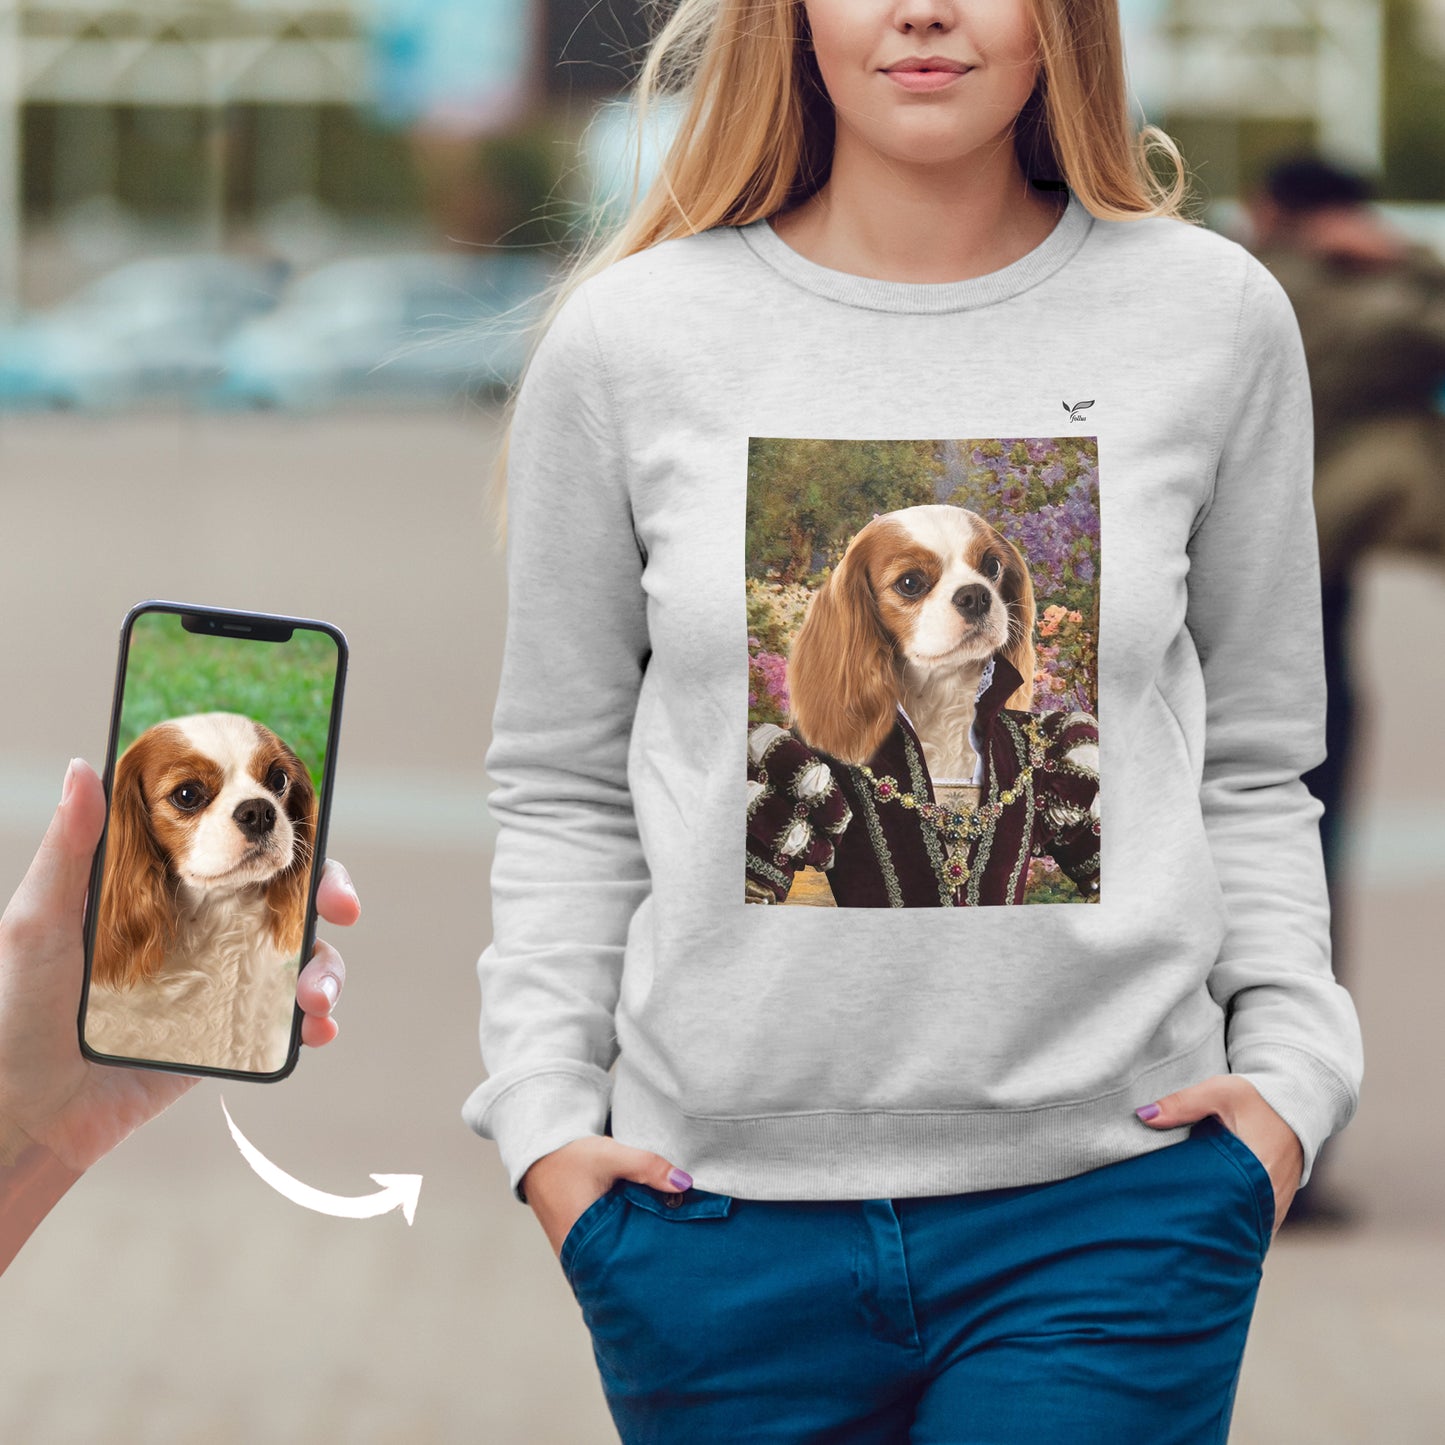 The Rose Queen - Personalized Sweatshirt With Your Pet's Photo